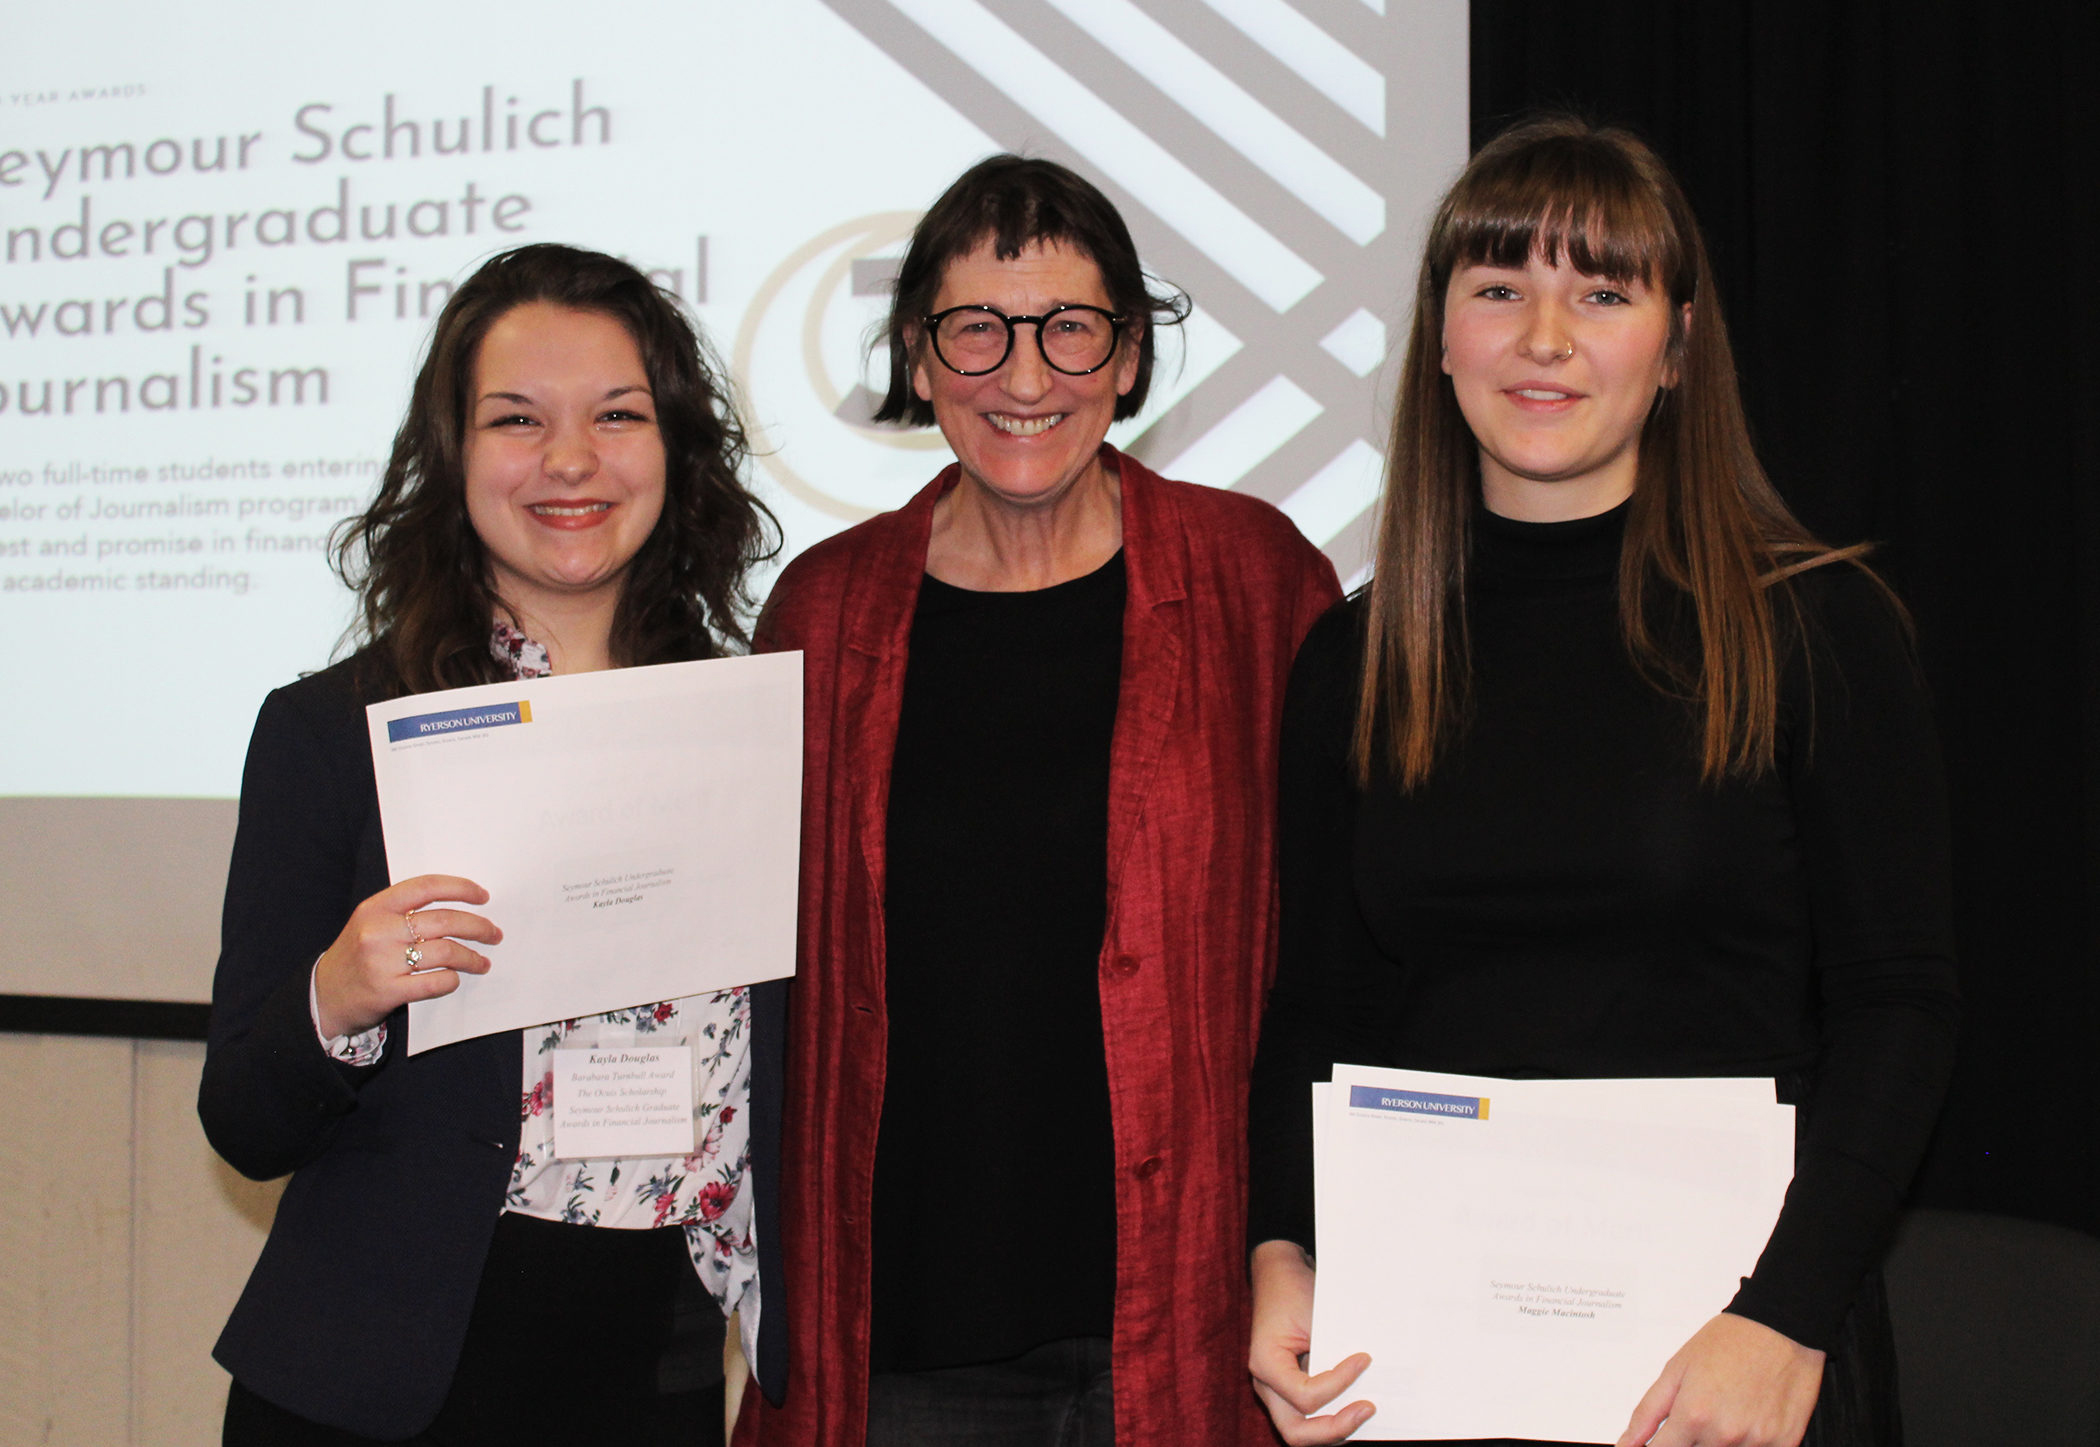 Seymour Schulich Undergraduate Awards in Financial Journalism recipients Kayla Douglas (l) and Maggie Macintosh (r) with Awards Committee Chair Jagg Carr-Locke.